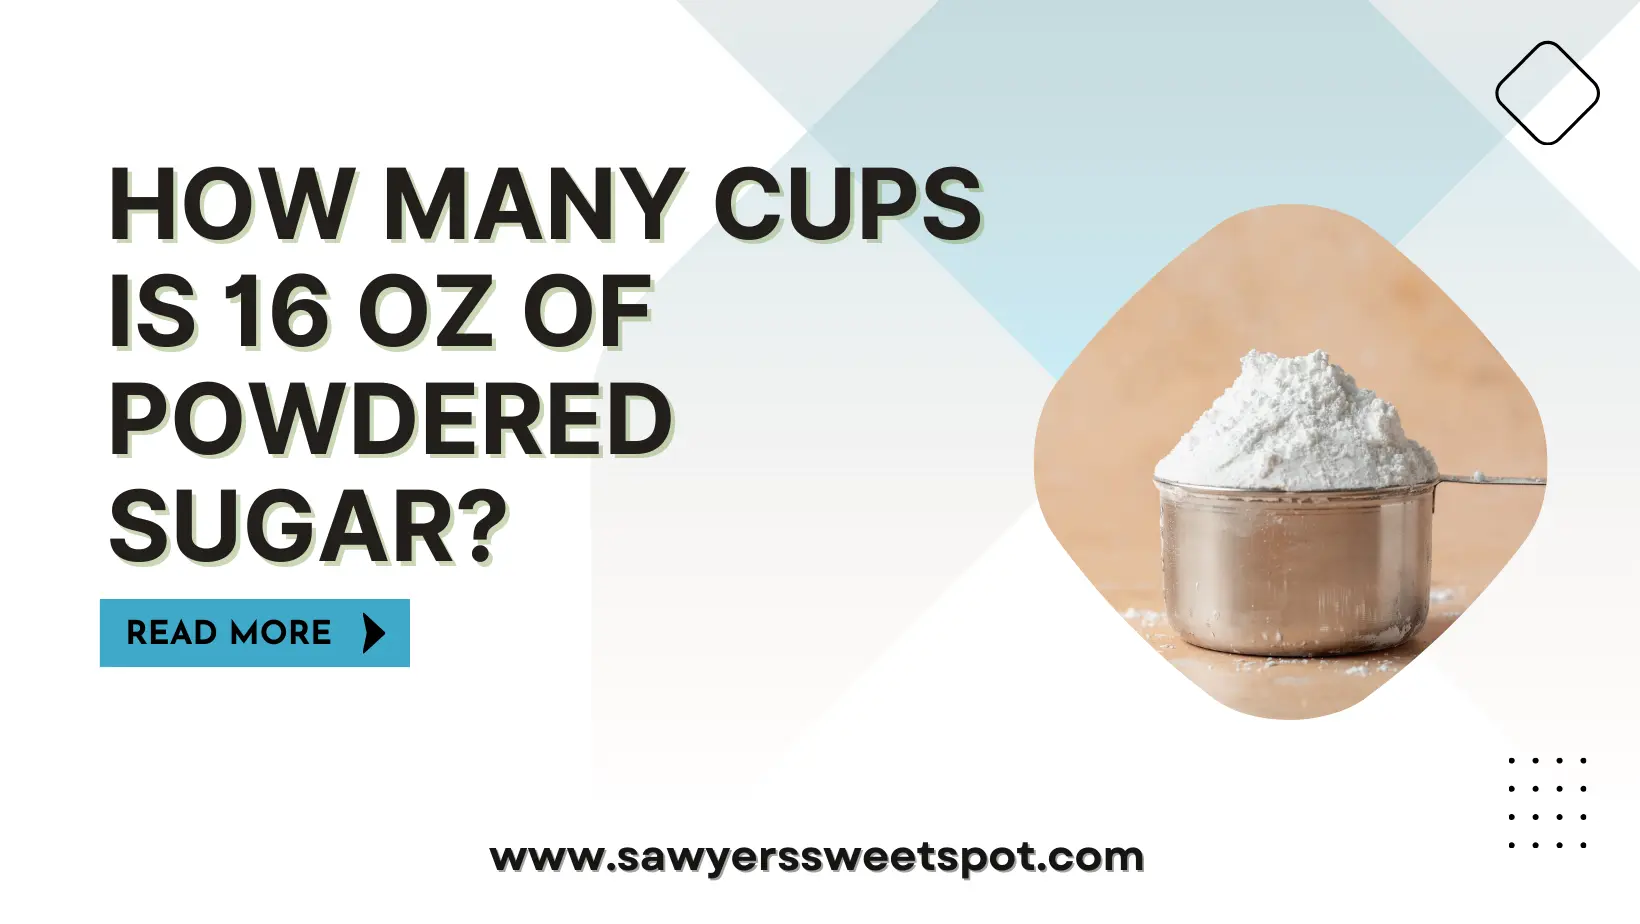 How Many Cups is 16 Oz of Powdered Sugar?